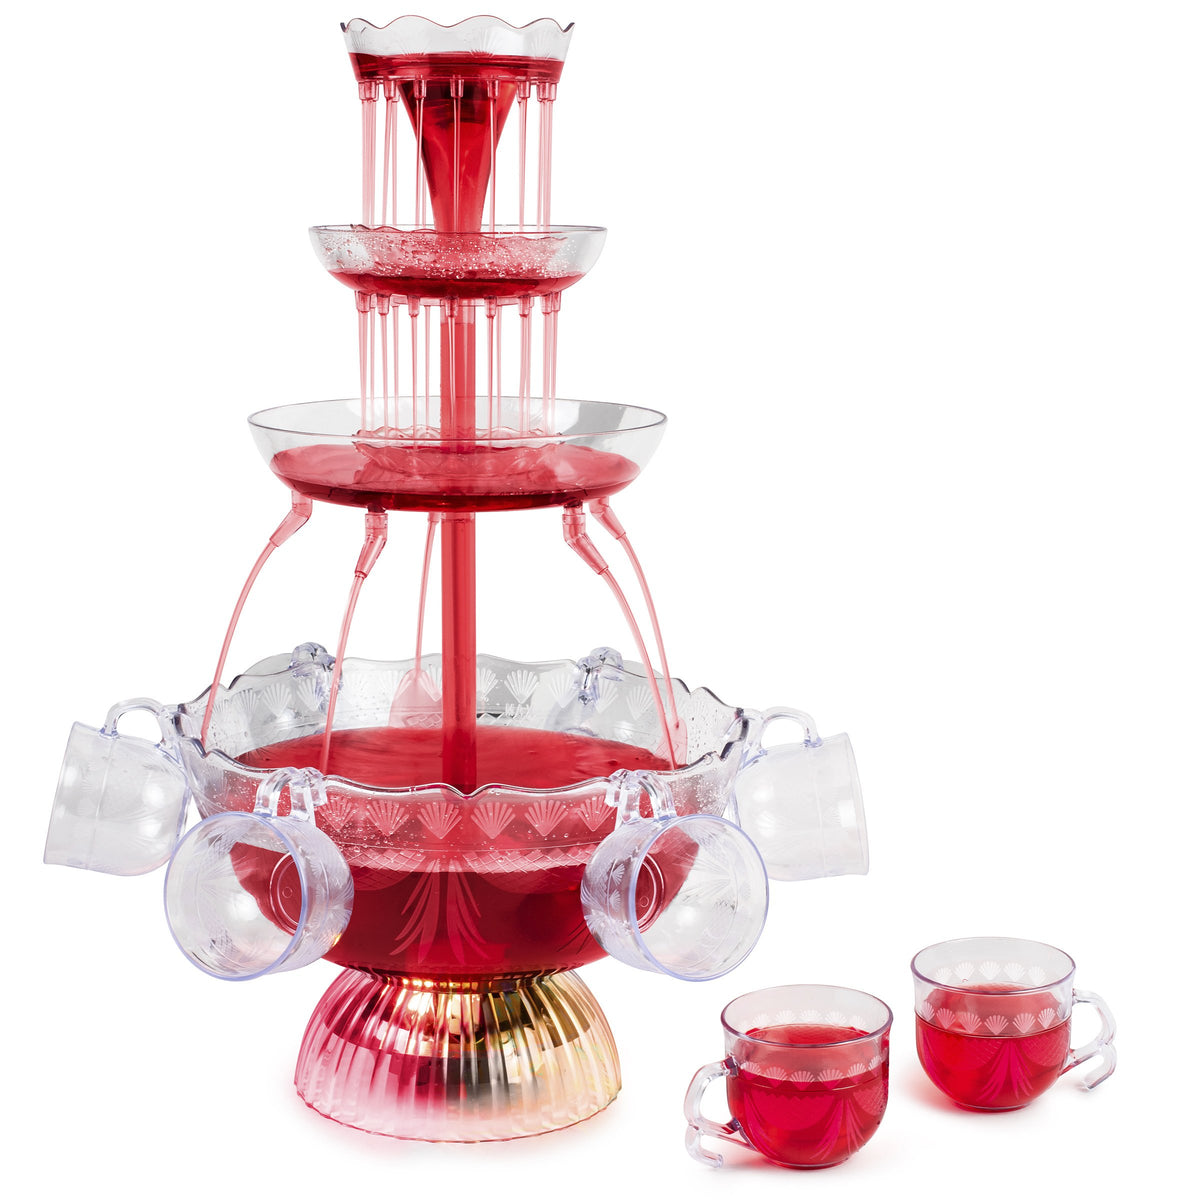 3-Tier Party Drink Dispenser – 1.5-Gallon Punch Fountain with LED Light  Base and 5 Cups – Juice, Soda, or Mimosa Tower by Great Northern Party, Red